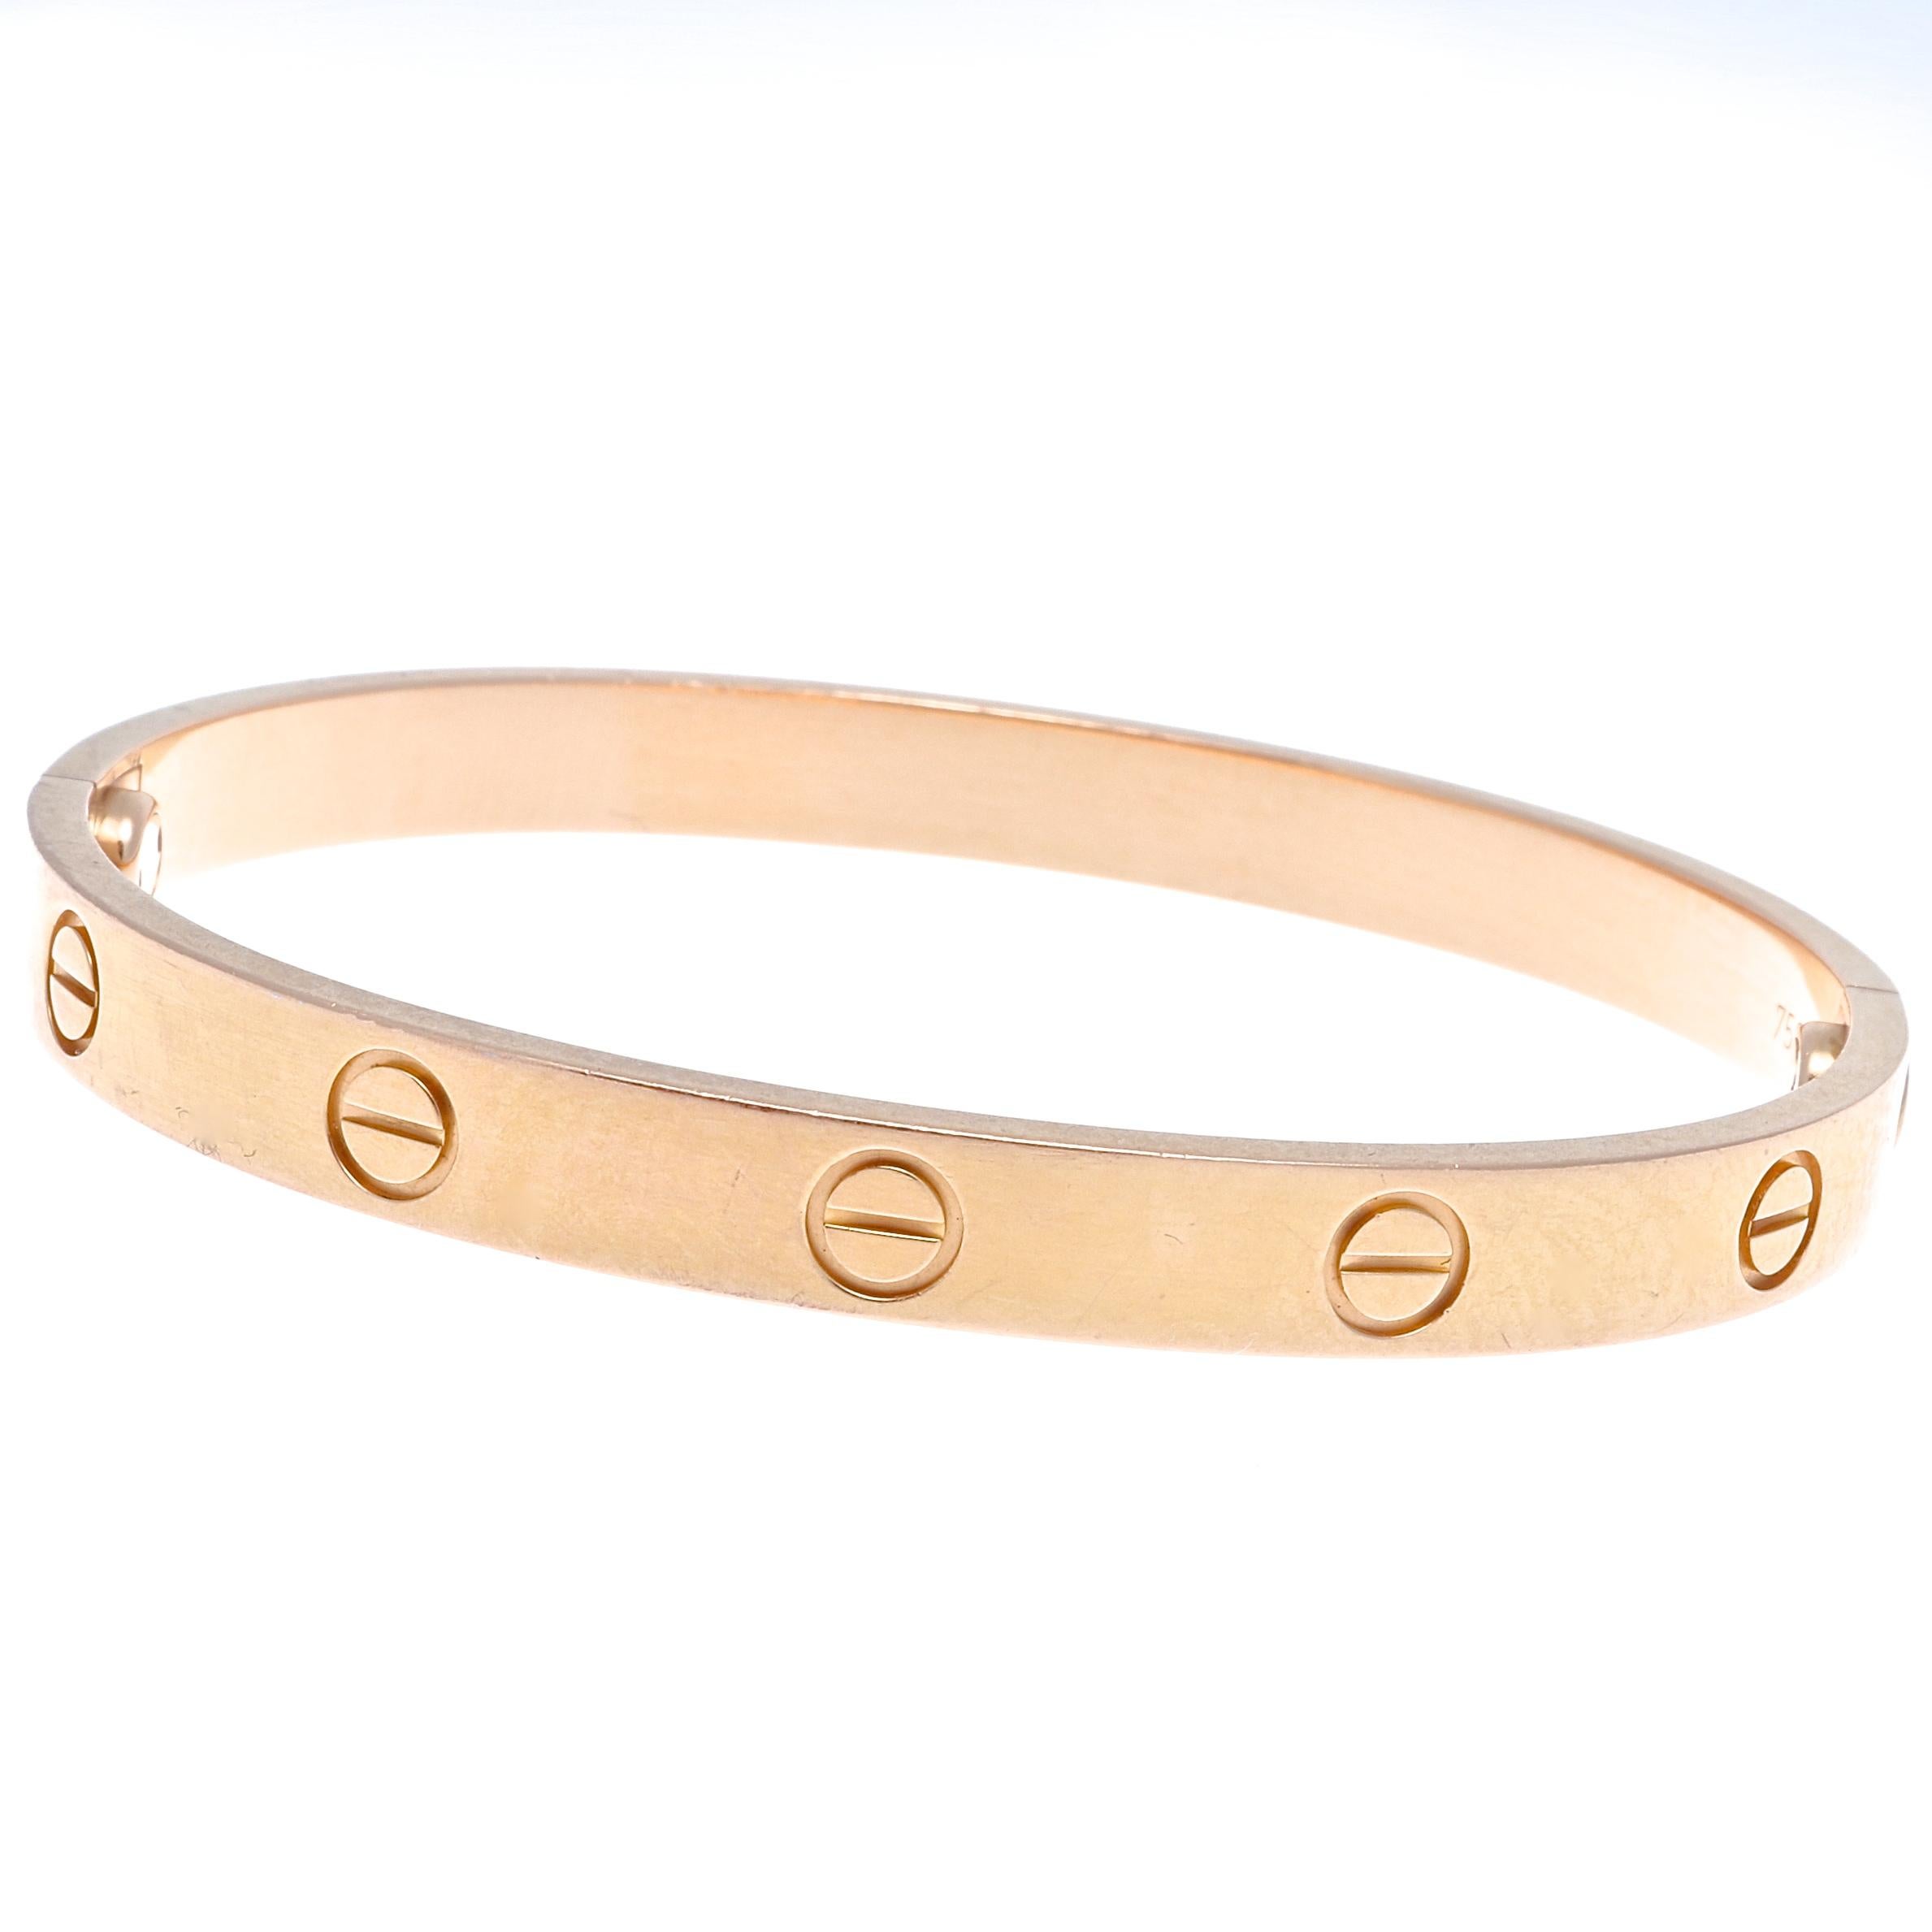 Dare to declare your love with Cartier in unforgettable fashion. Created in 1970's New York, this simple yet elegant design has become one if its iconic symbols. Crafted in 18k pink gold. Signed Cartier, numbered and accompanied with original